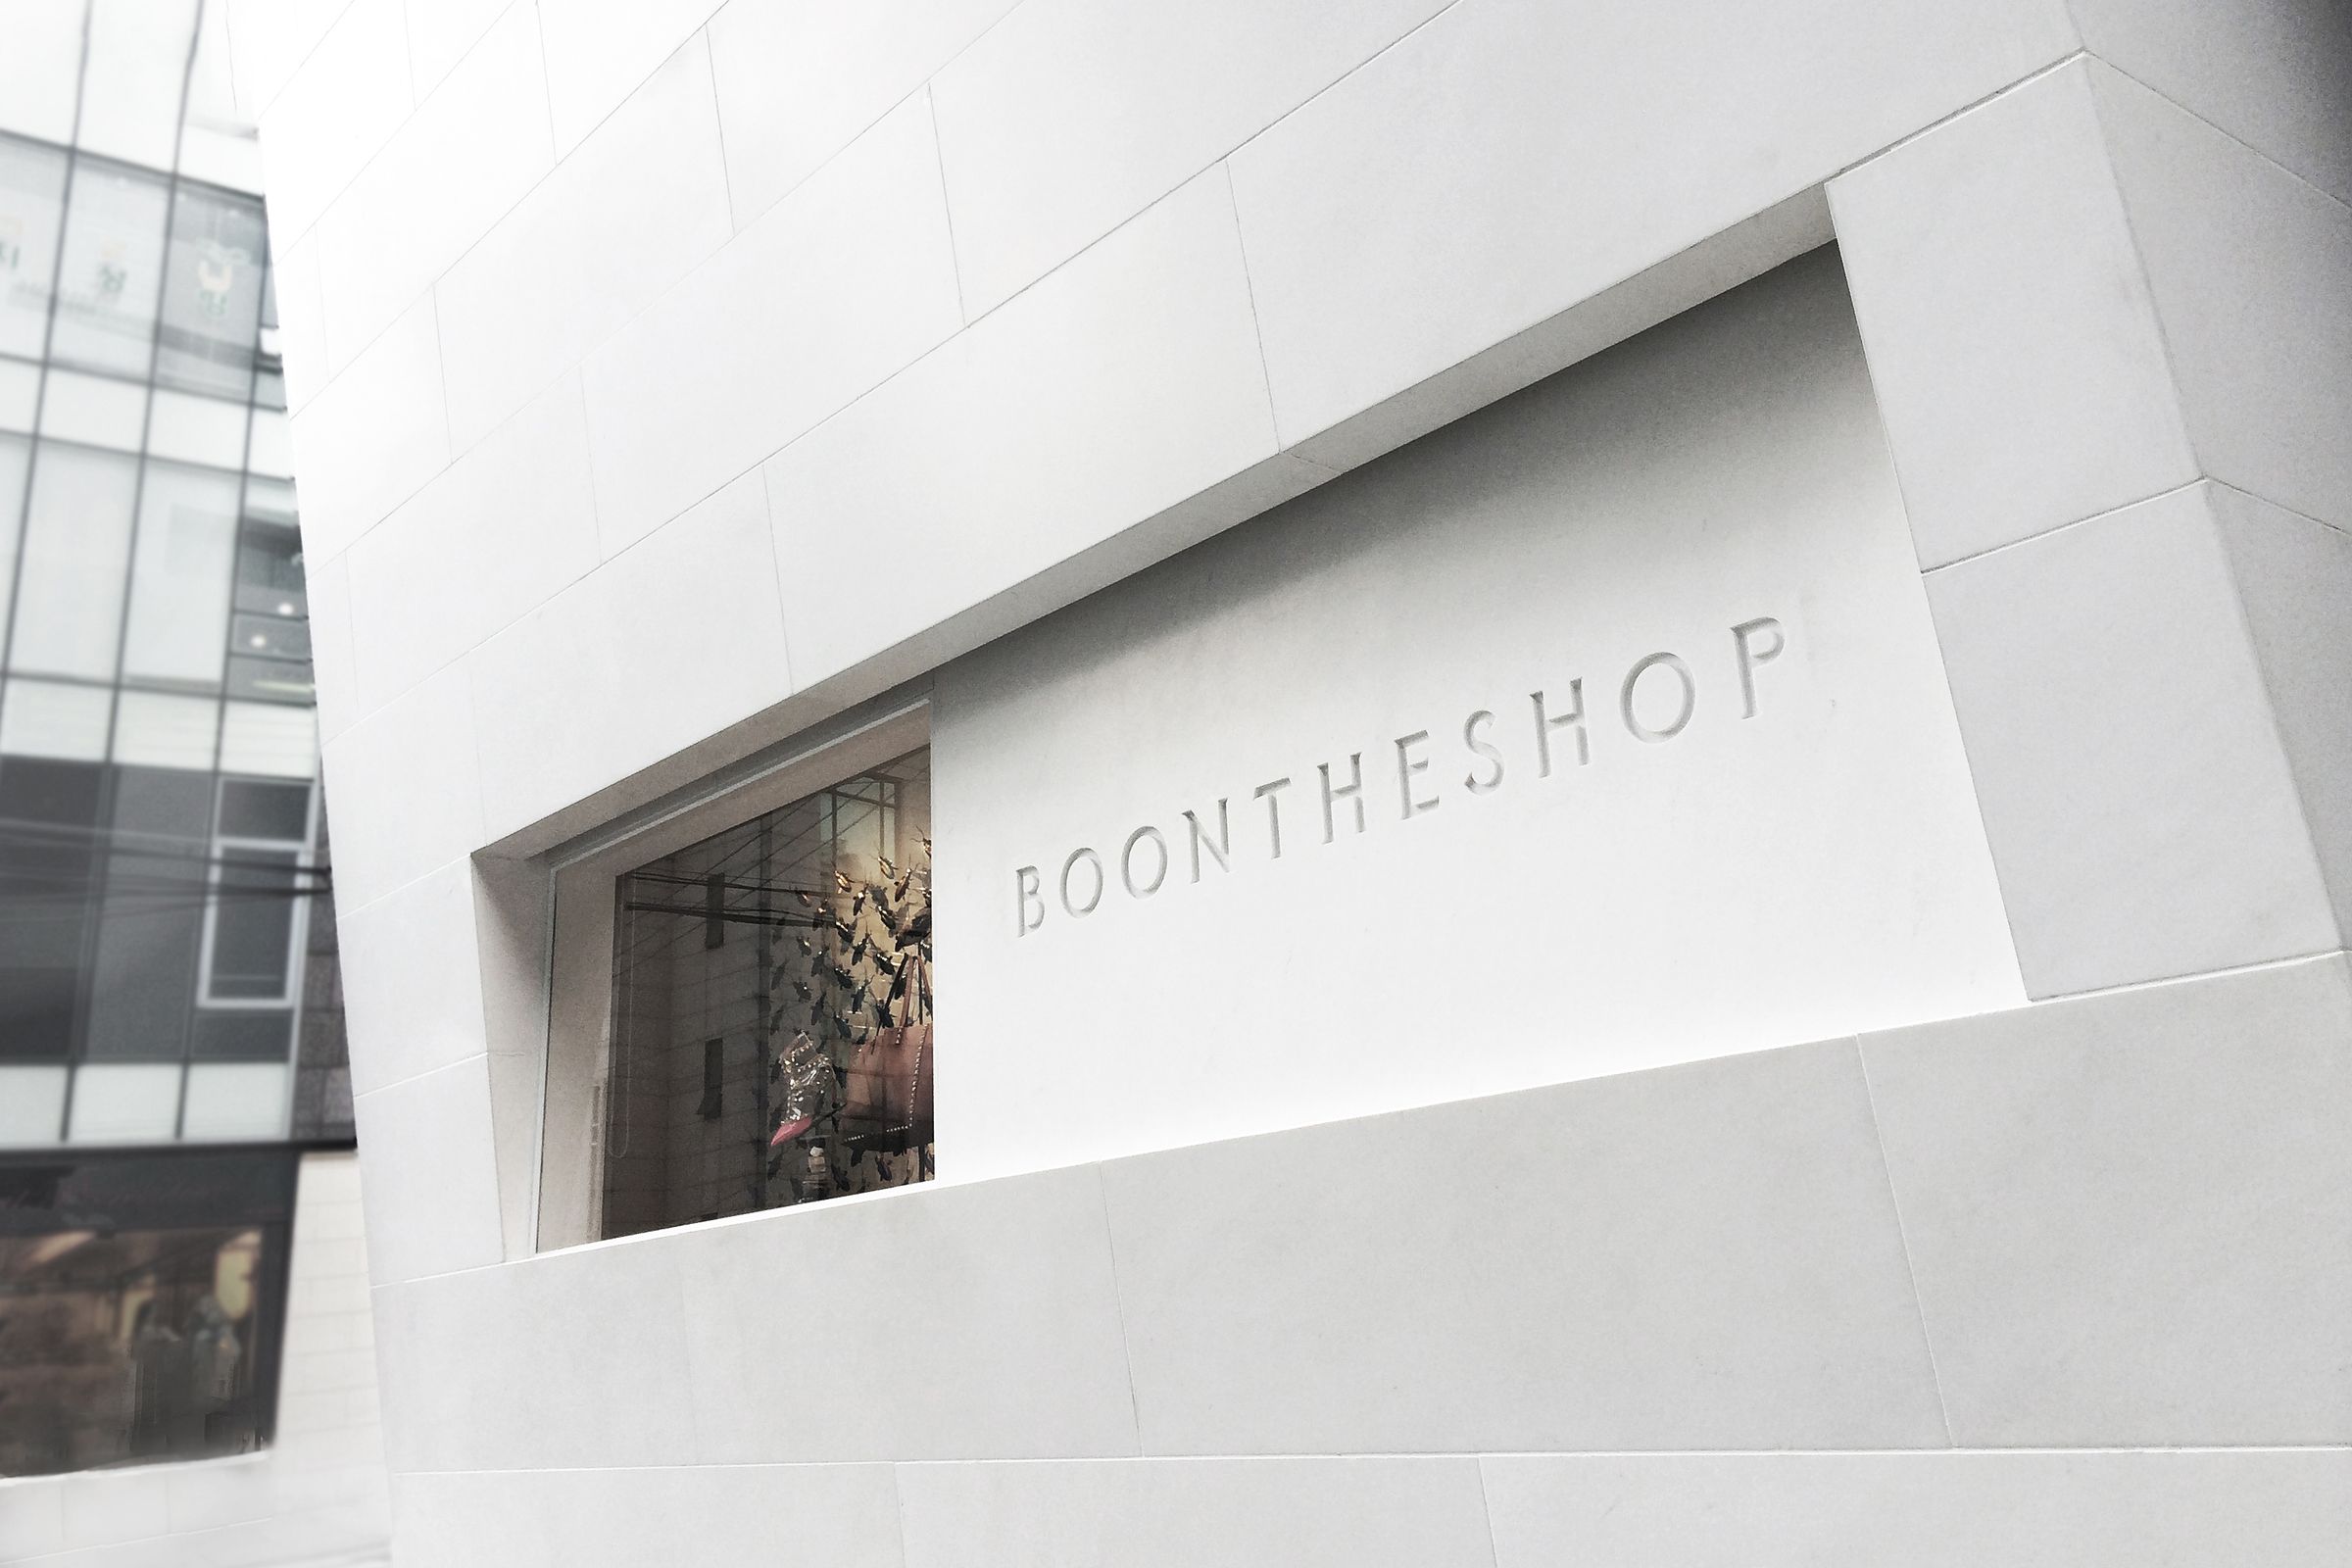 BOONTHESHOP signage on exterior of building